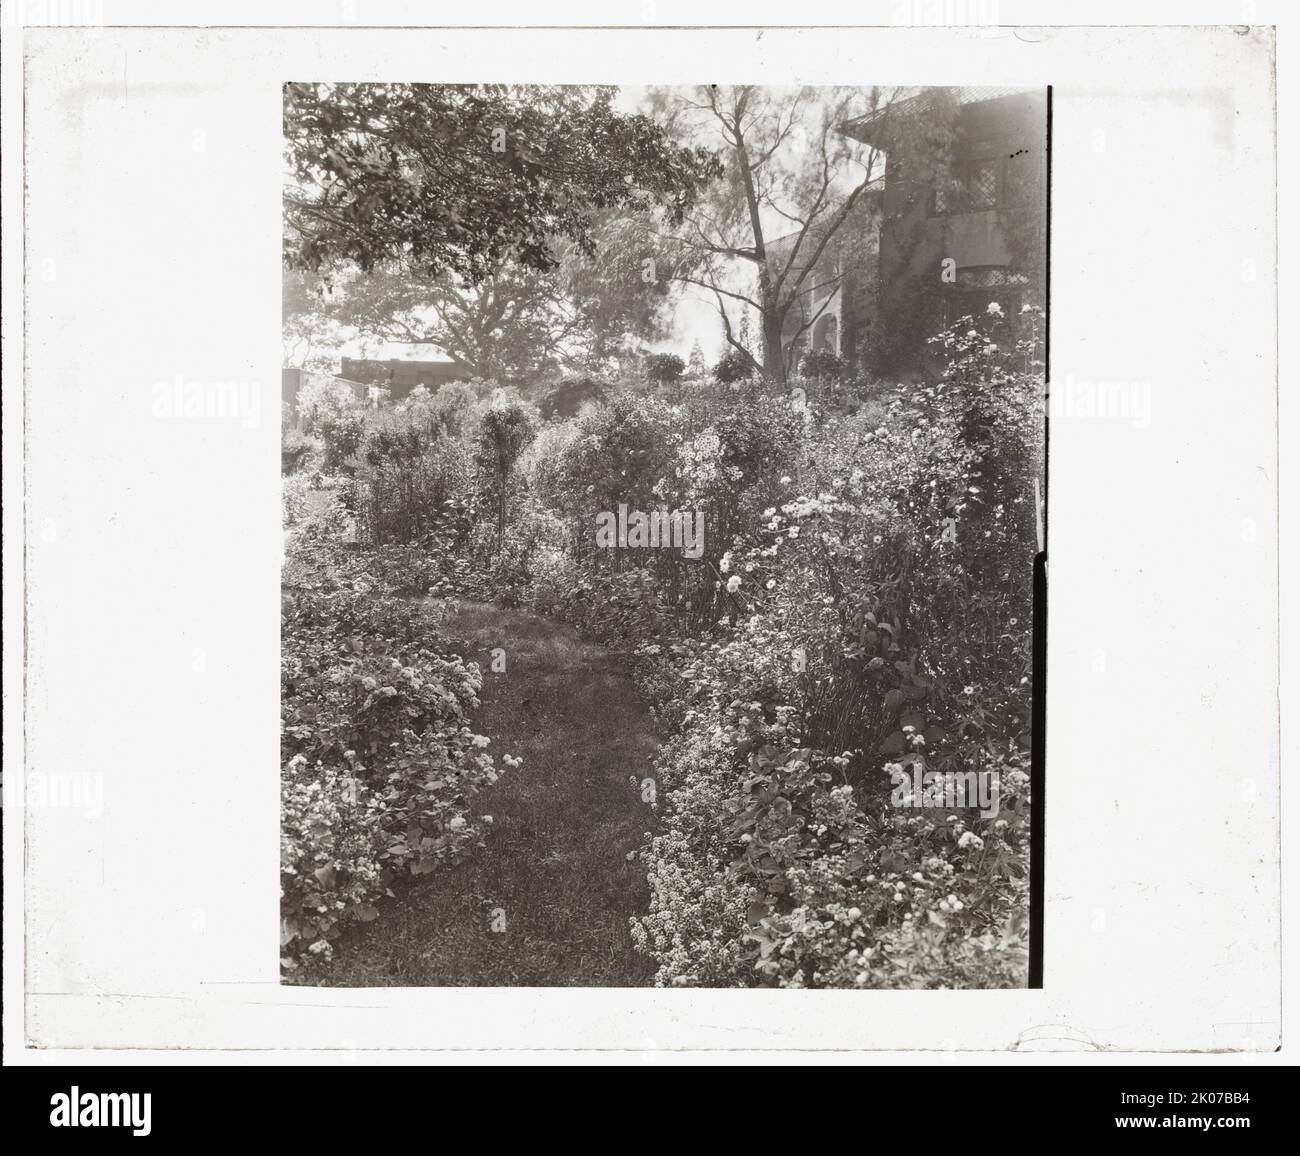 &quot;Pre`s Choisis,&quot; Albert Herter house, Georgica Pond, East Hampton, New York, 1913. House Architecture: Grovesnor Atterbury, 1898-1899. Landscape: Adele McGinnis (Mrs. Albert) and Albert Herter from 1898. Other: Later named &quot;The Creeks.&quot; The house was on 75 acres given to the Herters as a marriage present by Albert Herter's mother Mary Herter. Stock Photo